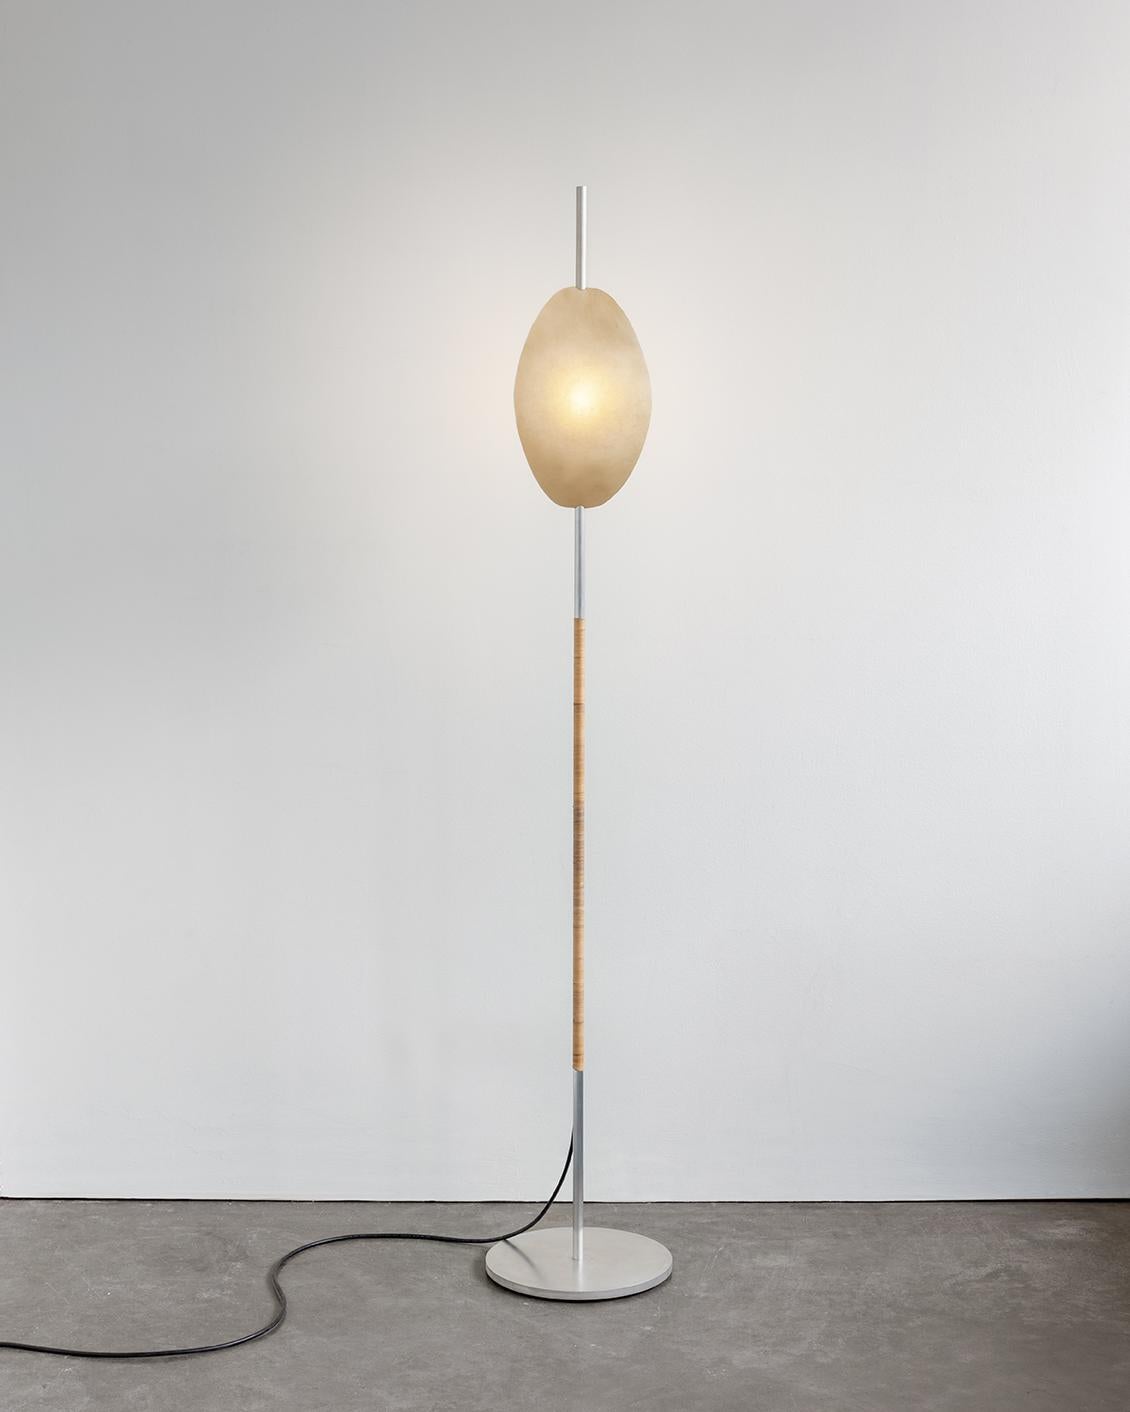 Deas light by Calen Knauf
Dimensions: D 28 x W 28 x H 161 cm
Materials: Aluminum, rattan, rawhide, resin

The Deas is an accent floor light consisting of a solid, waxed aluminum main support and base, hand wrapped in rattan. The diffuser